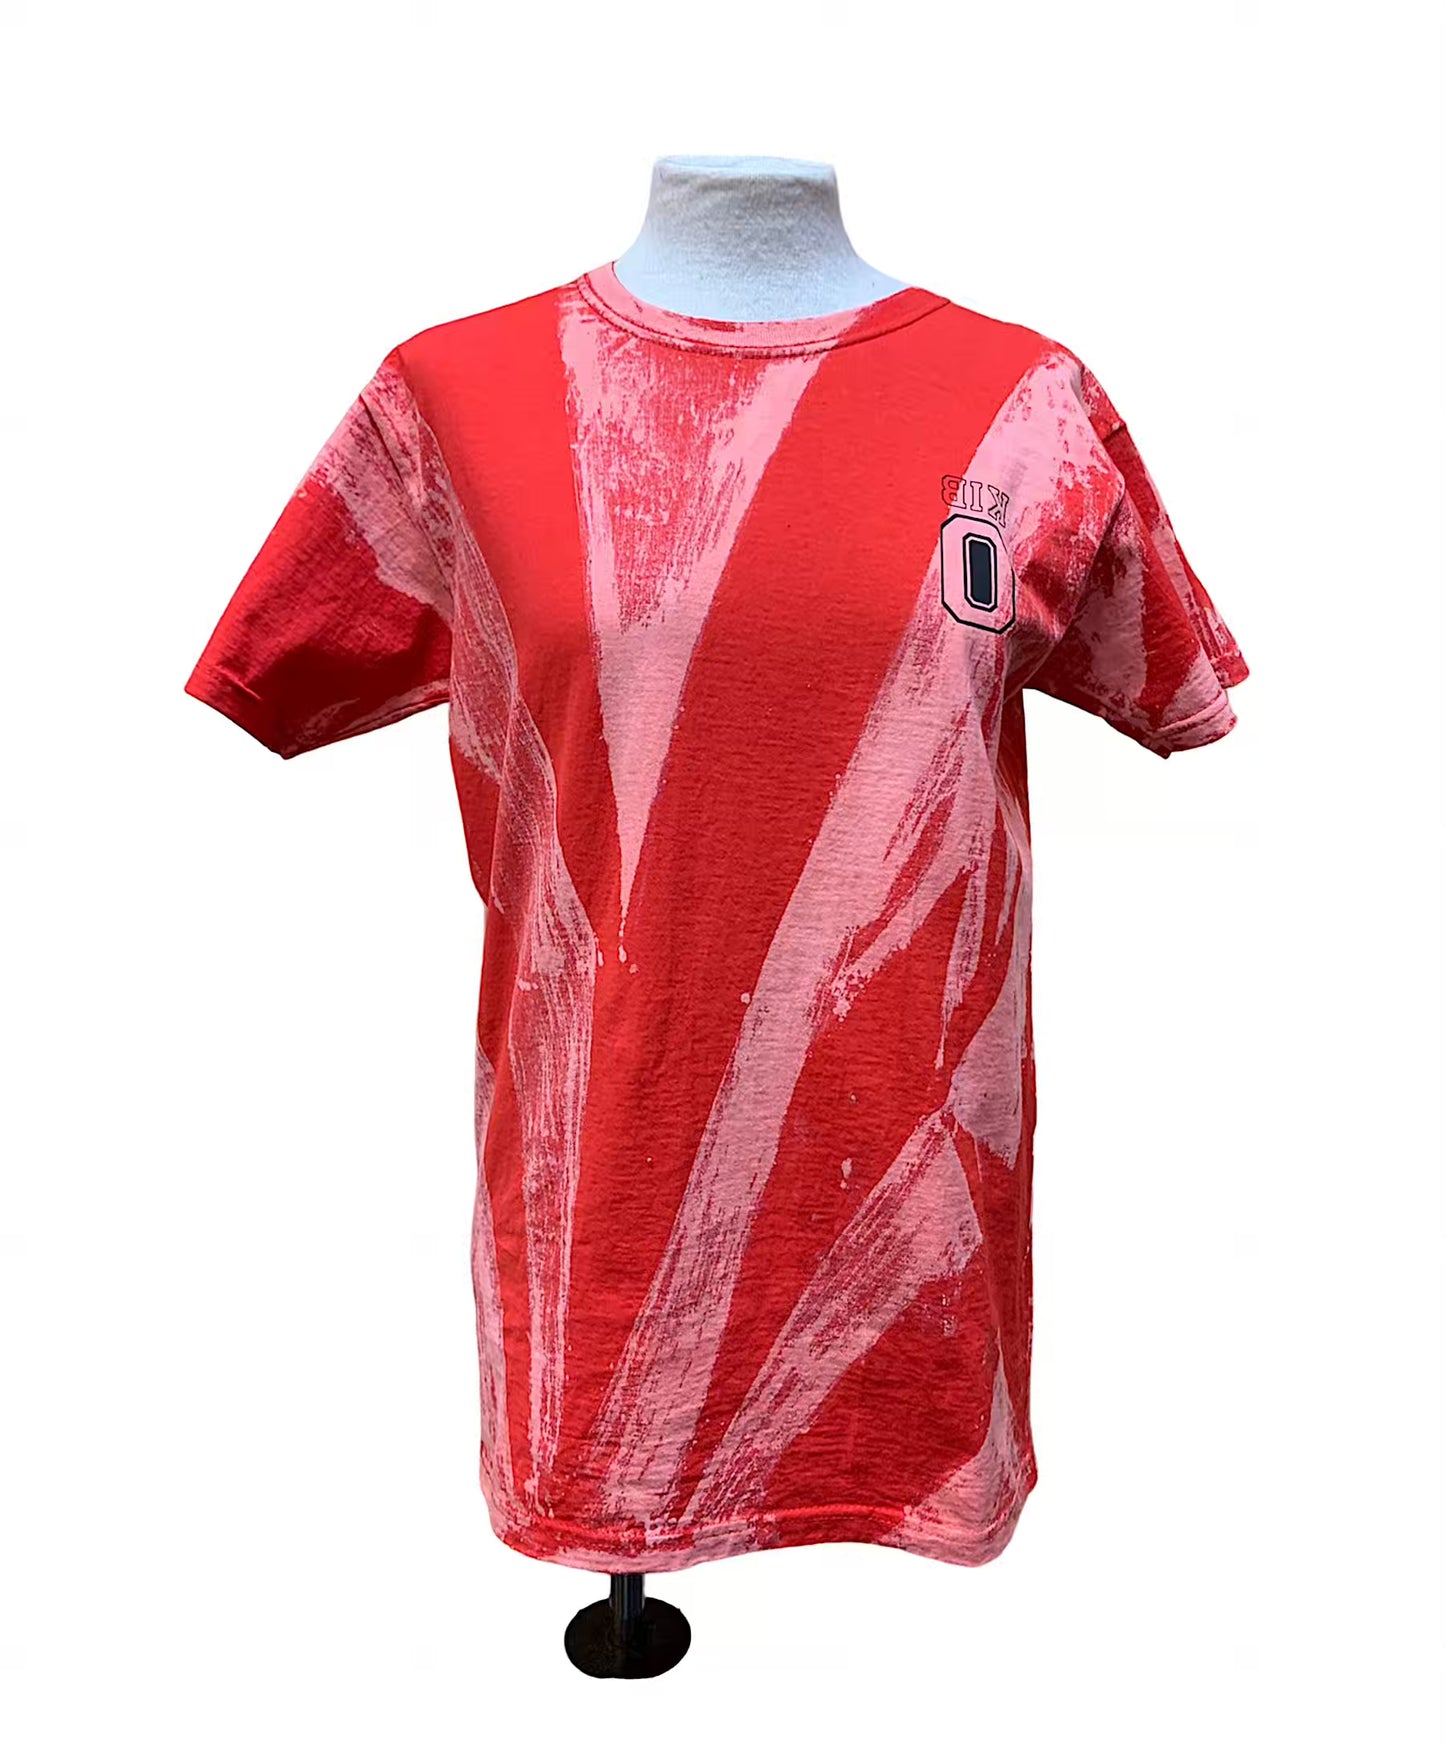 Partxis Red S T-shirt